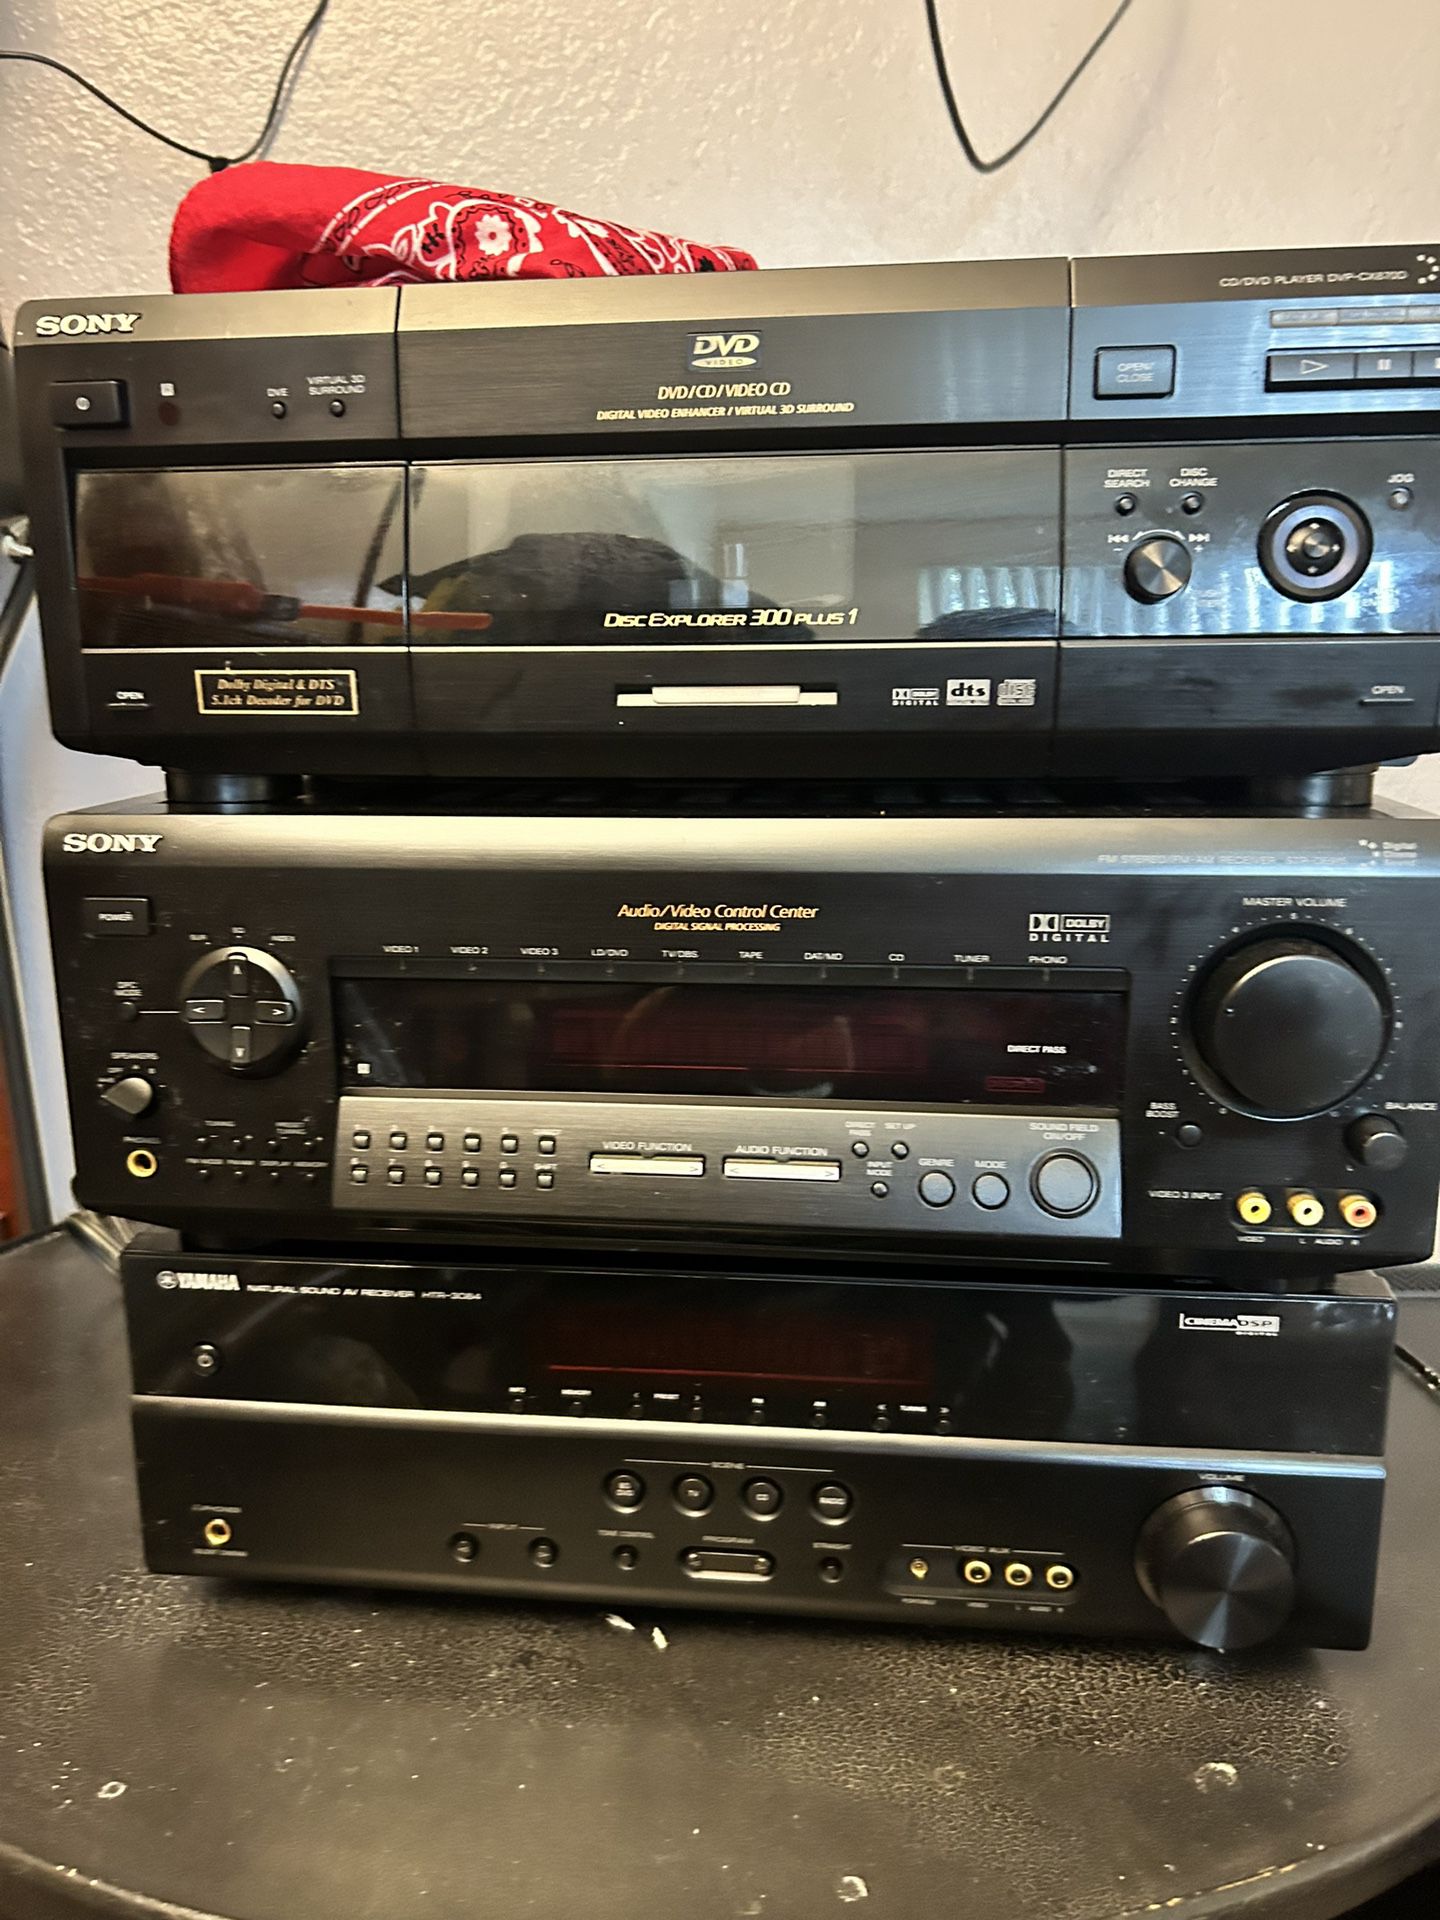 Sony And Yamaha Receivers And Sony CD/DVD Player